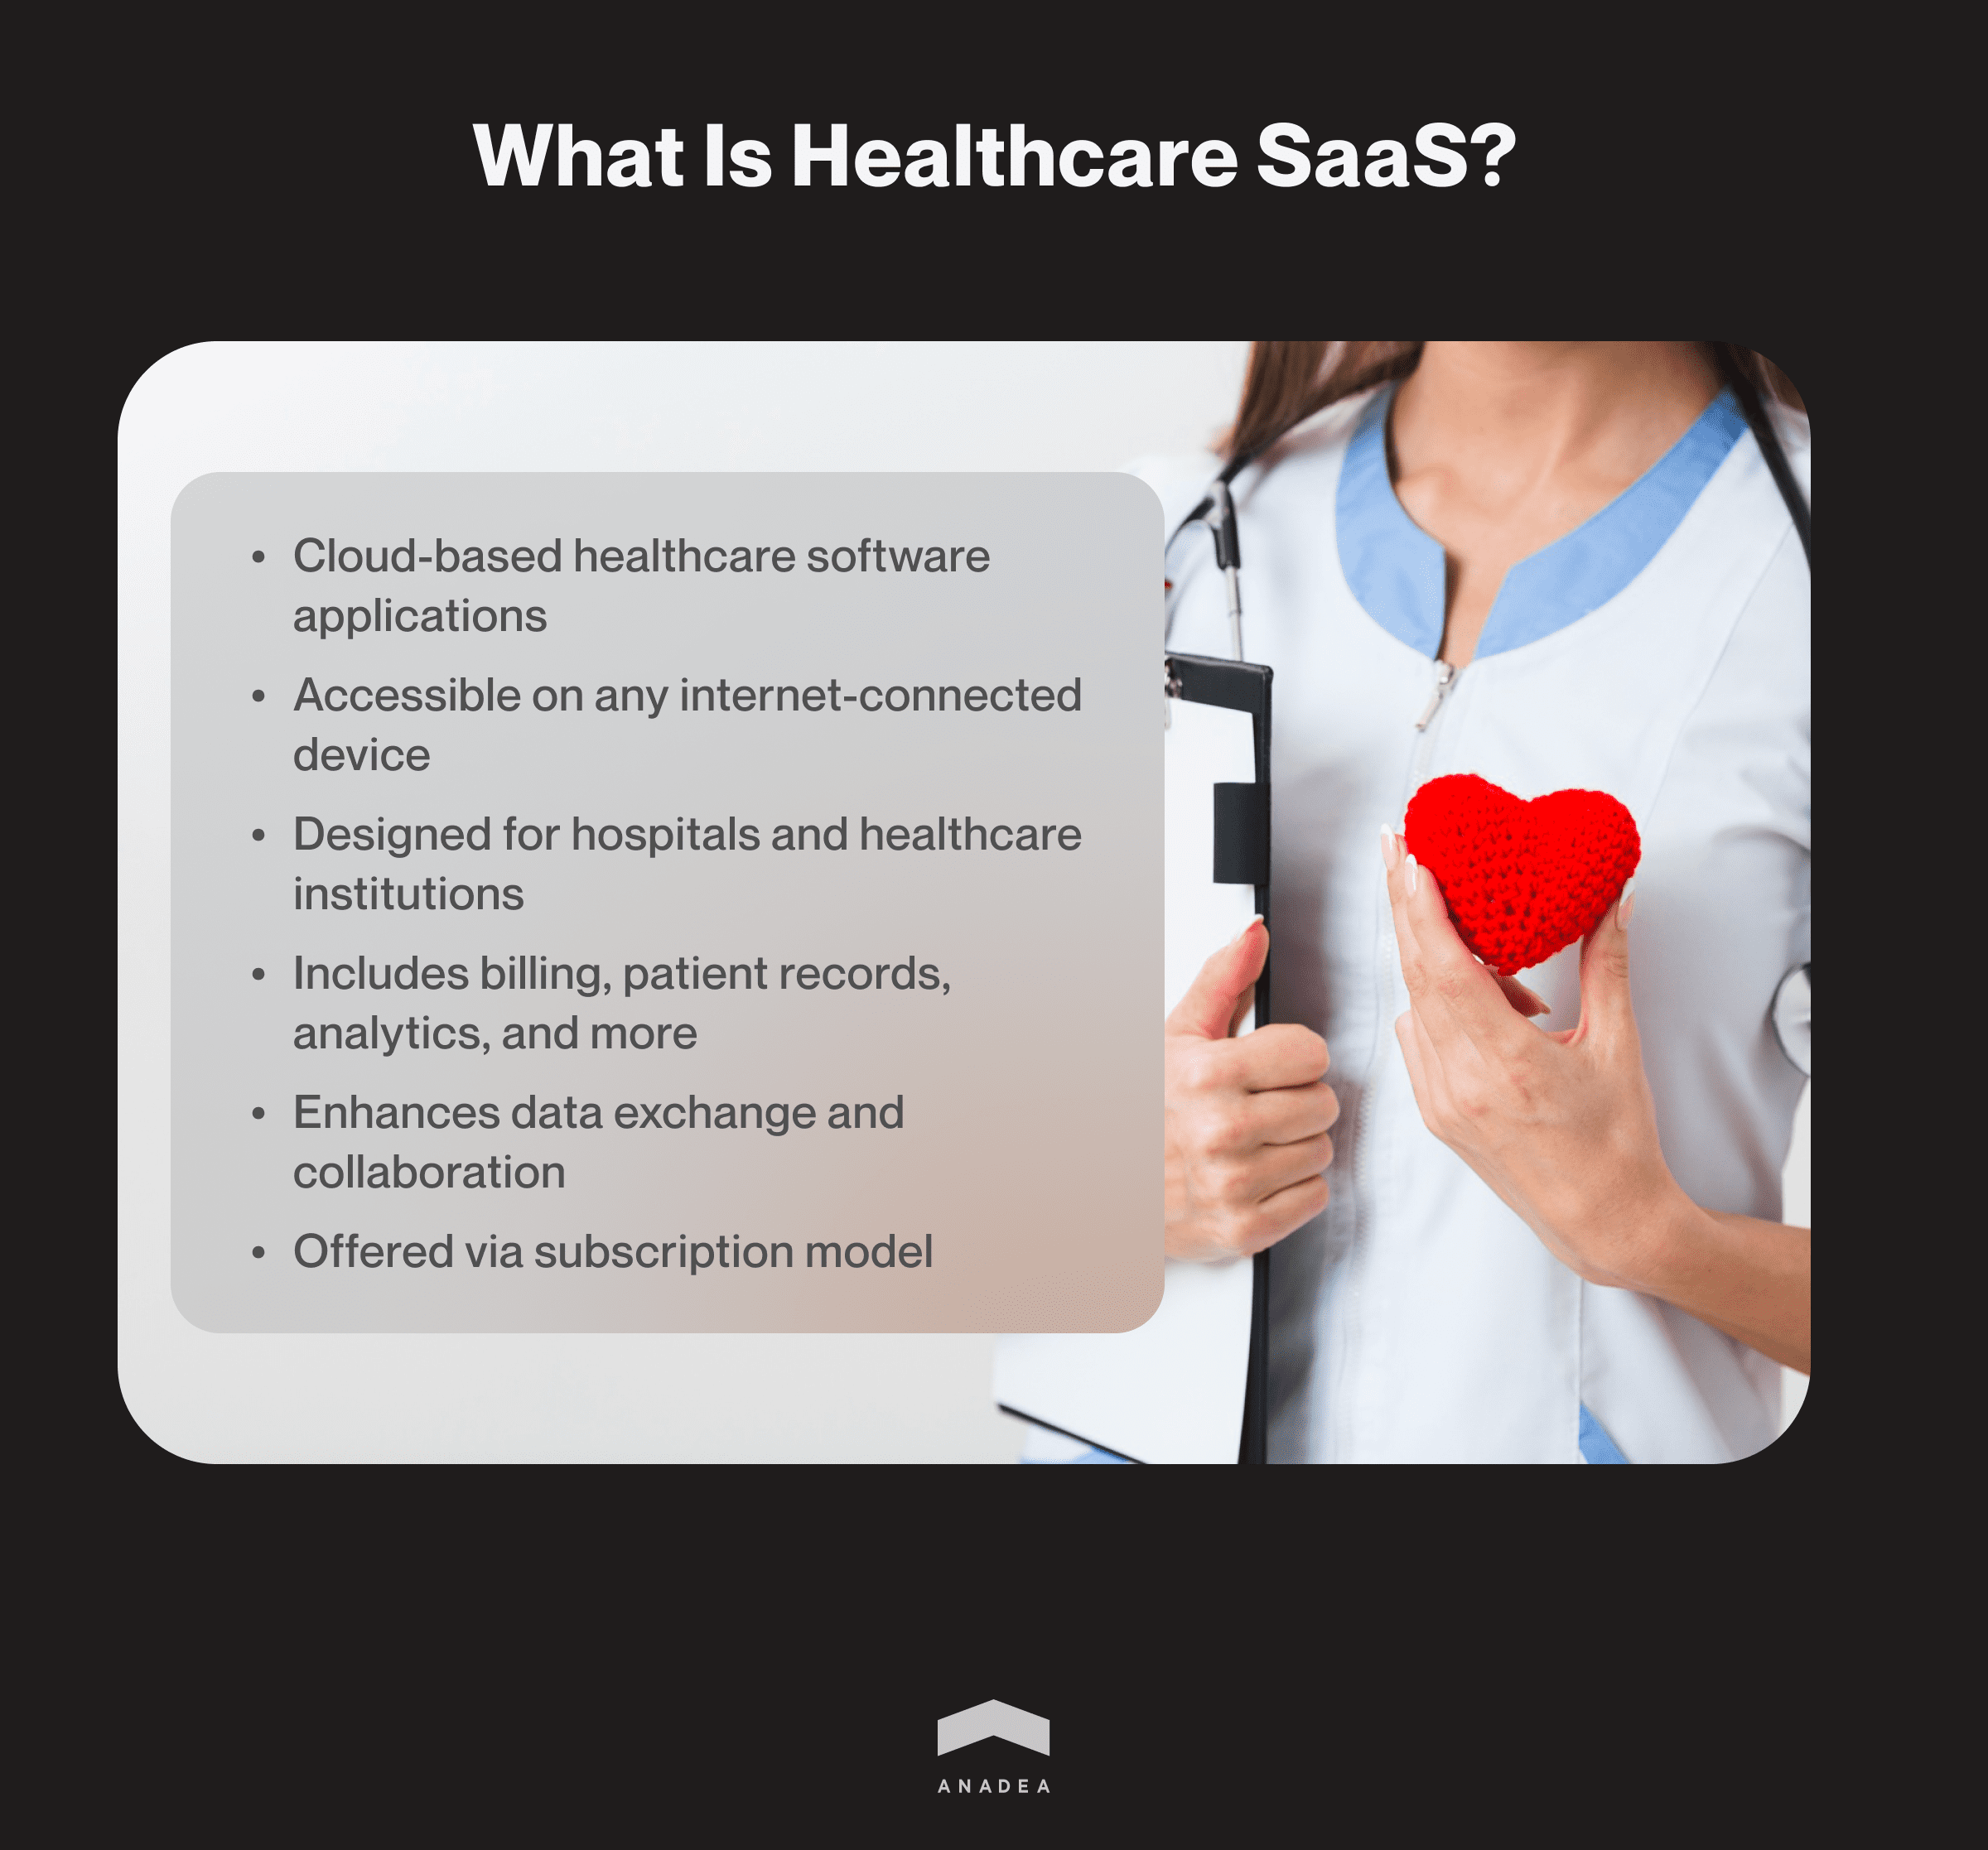 What is Healthcare SaaS